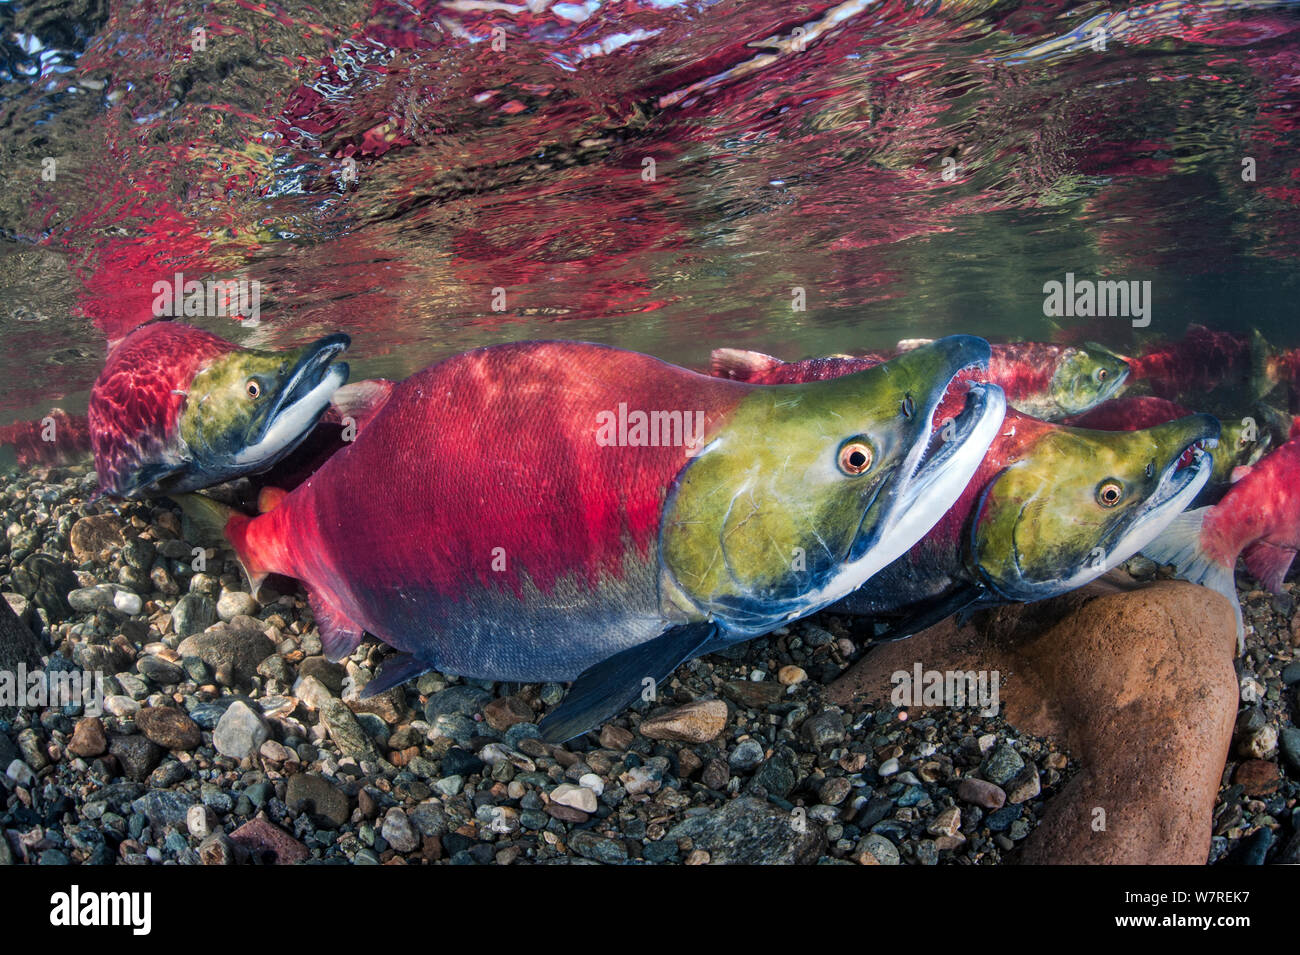 Group of male Sockeye salmon (Oncorhynchus nerka) in their spawning river. Adams River, British Columbia, Canada, October. Stock Photo